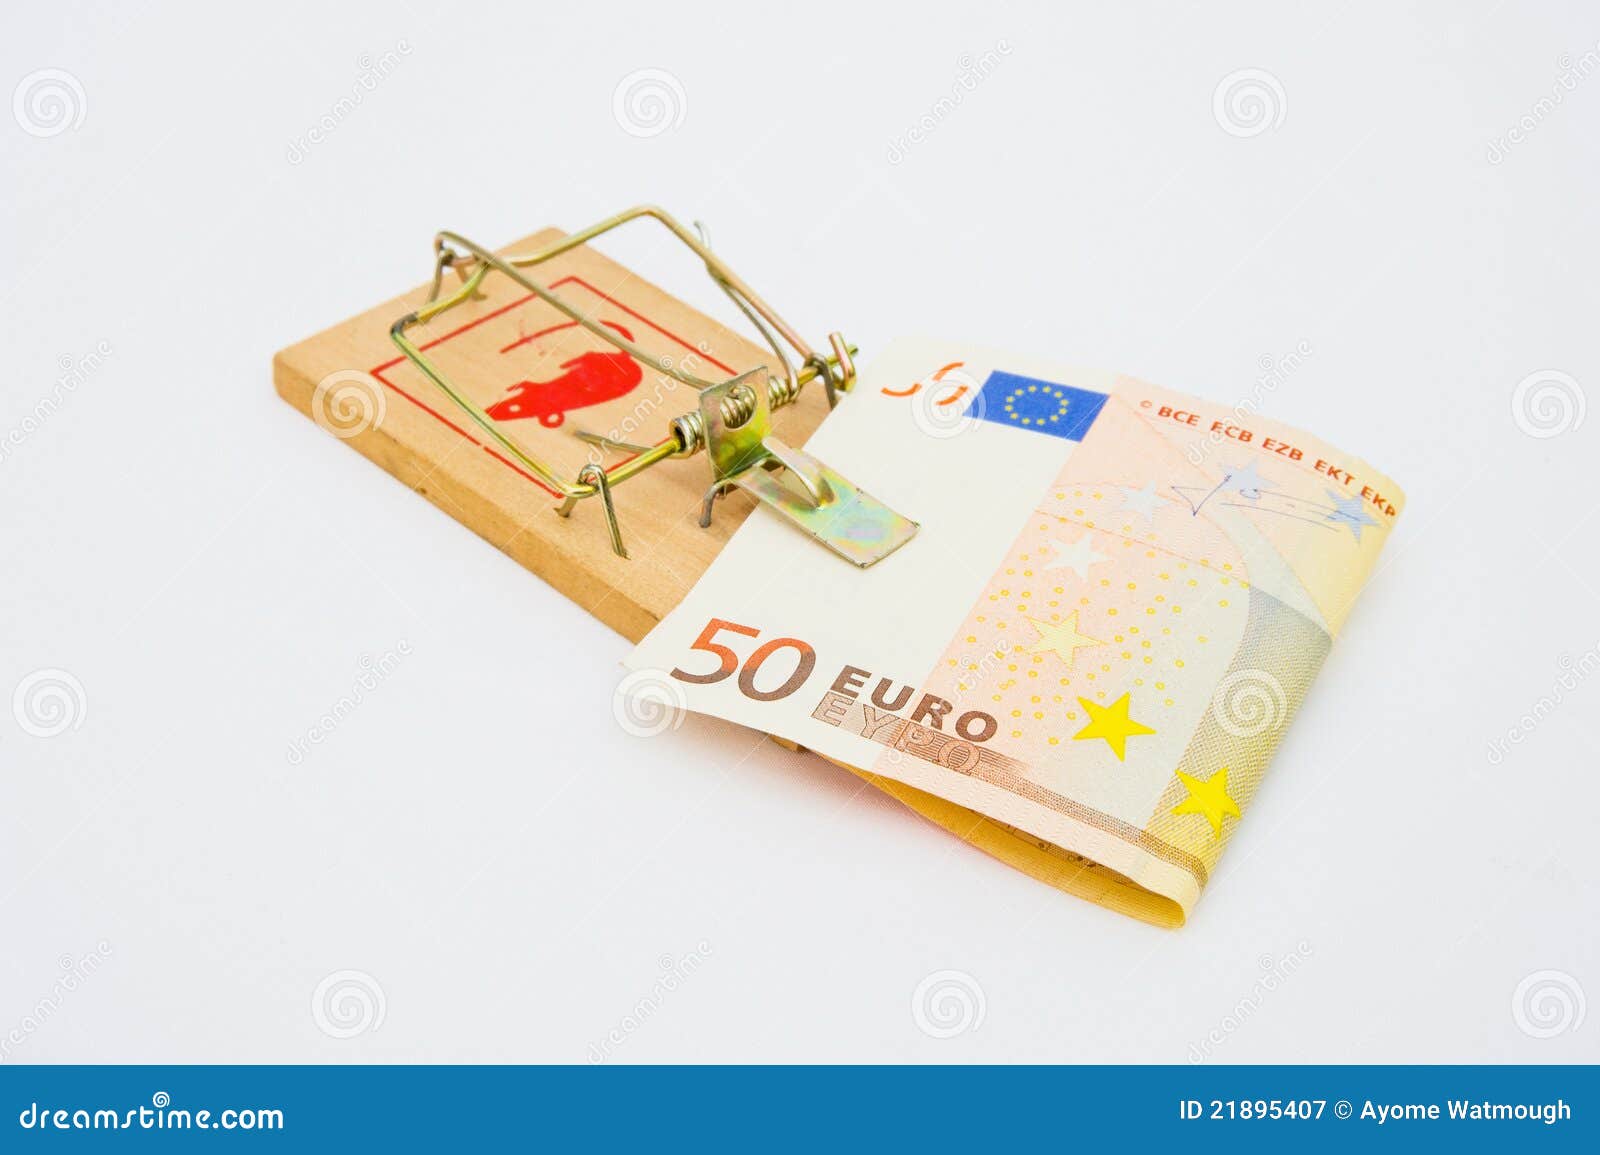 the euro: a currency trap.